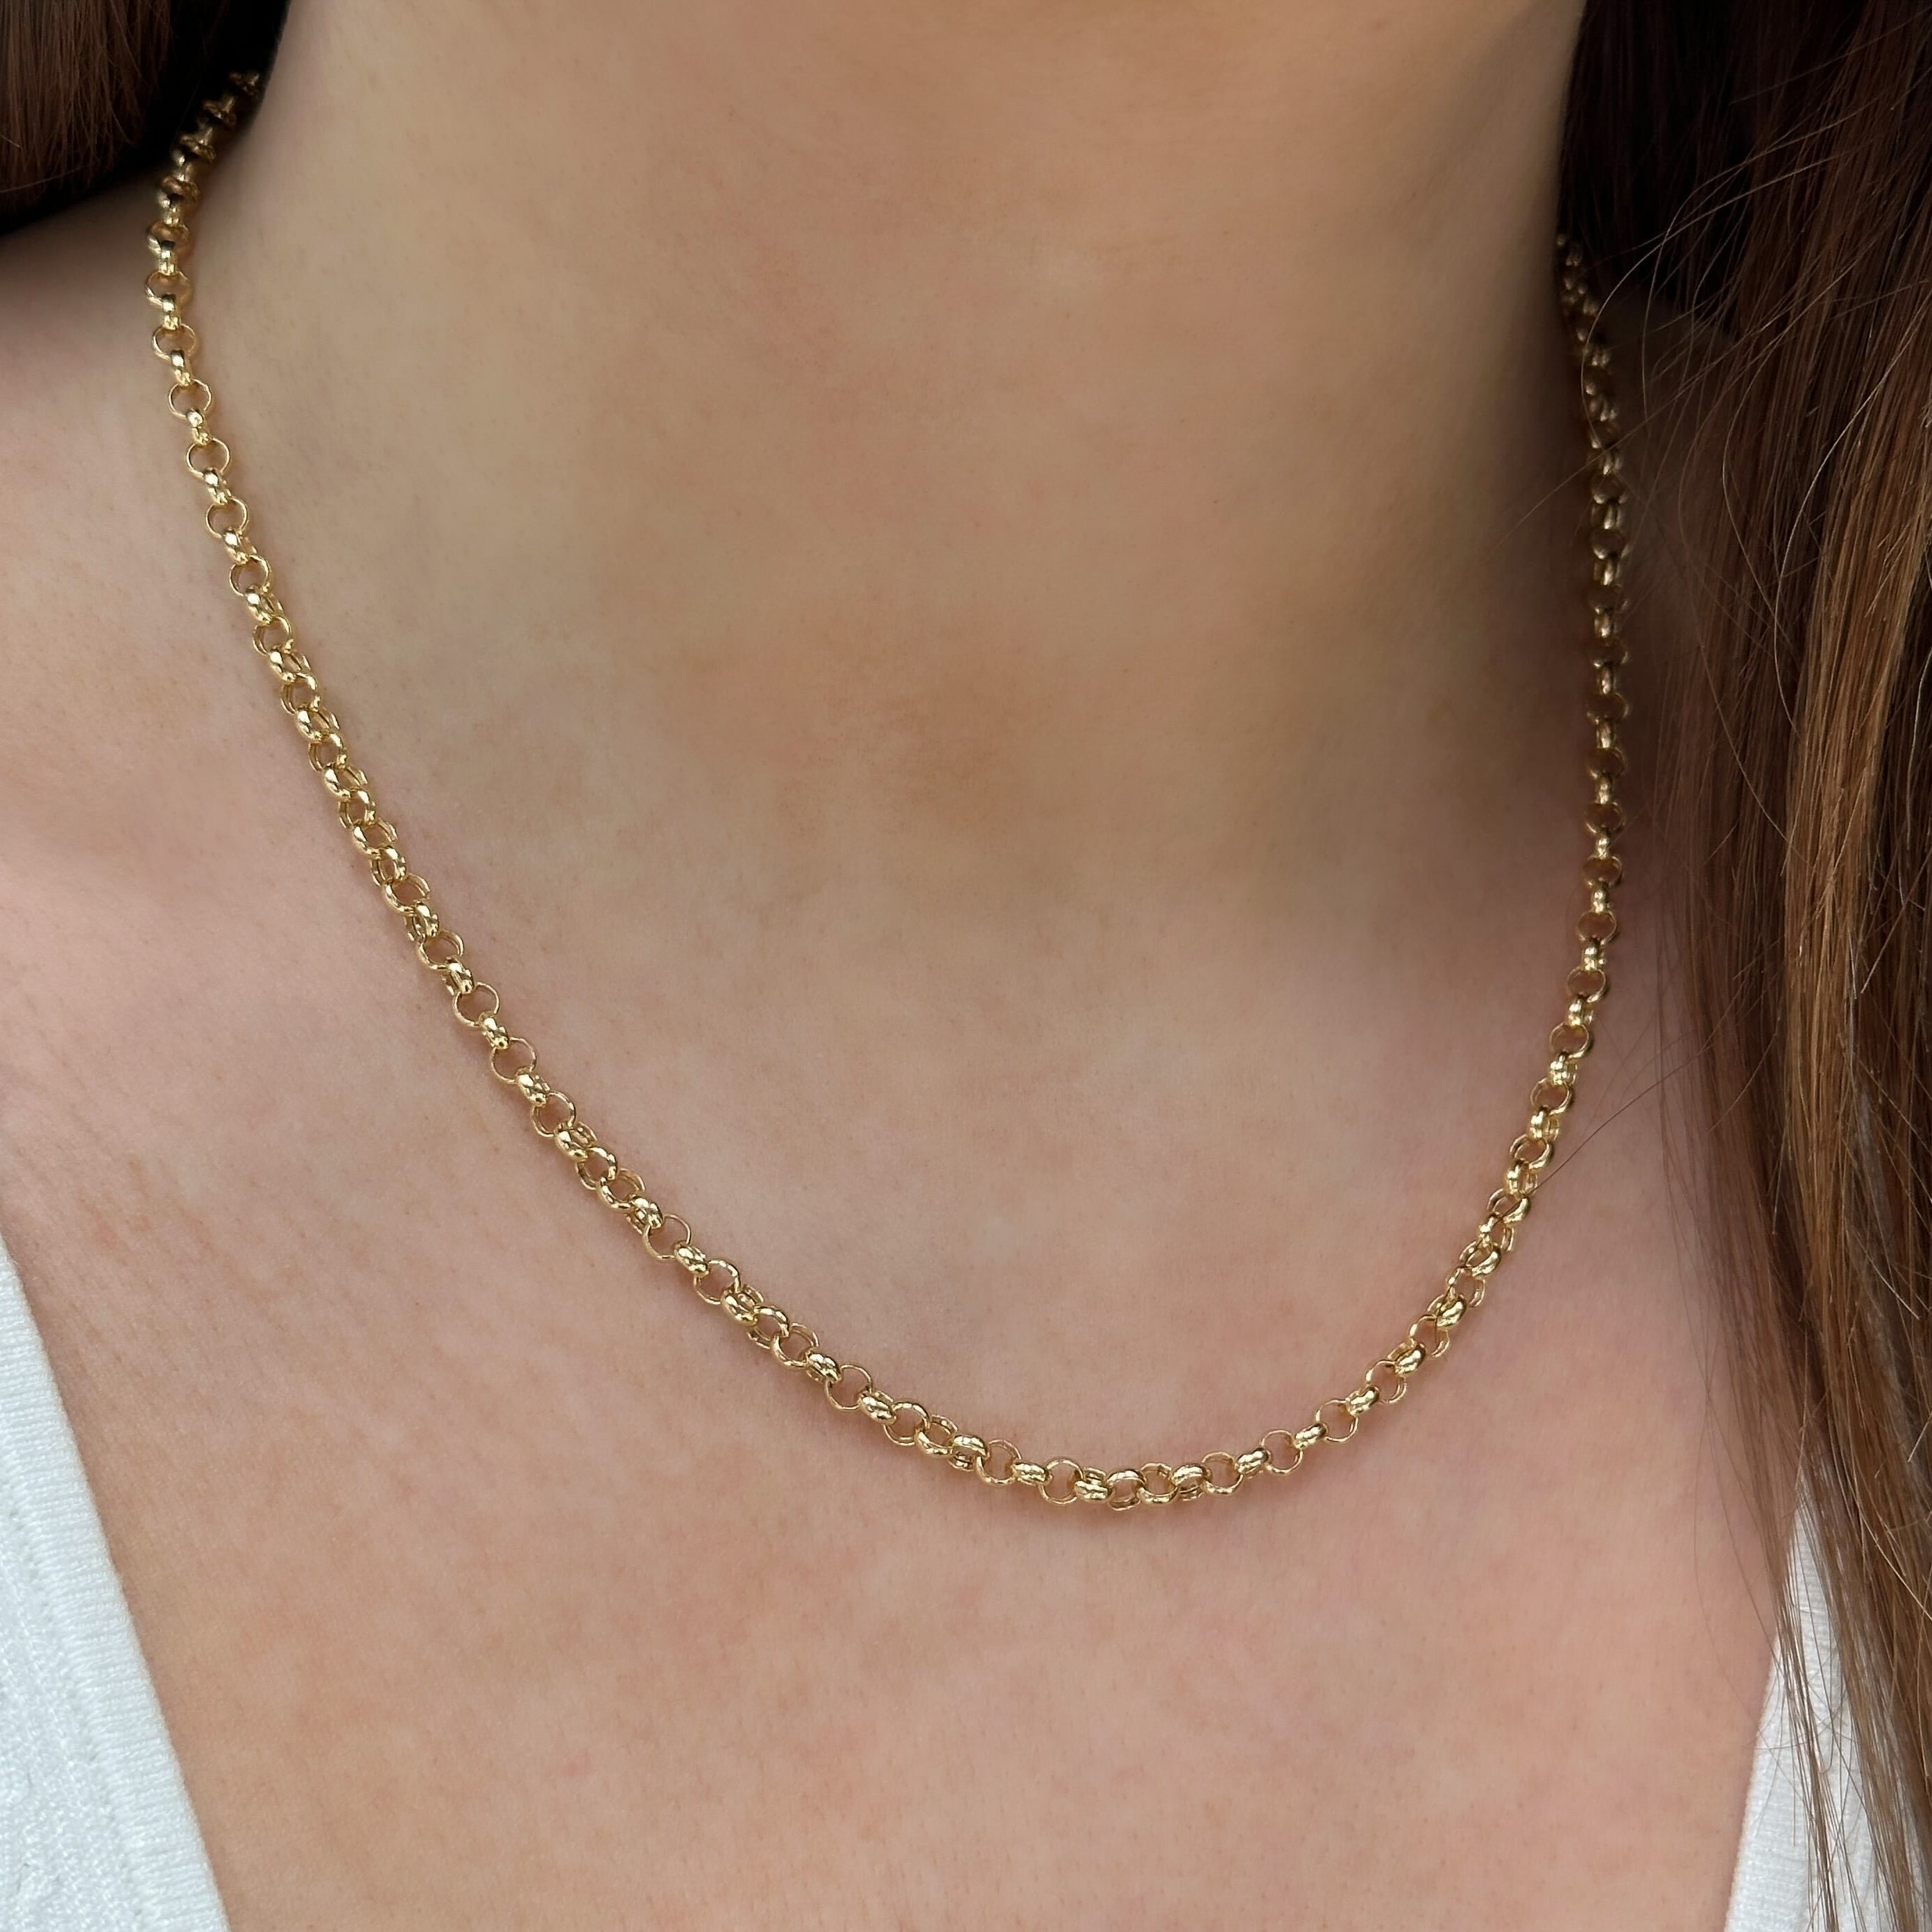 14K Yellow Gold 4mm Handcrafted Rolo Chain Necklace 26 Inches | Sarraf.com